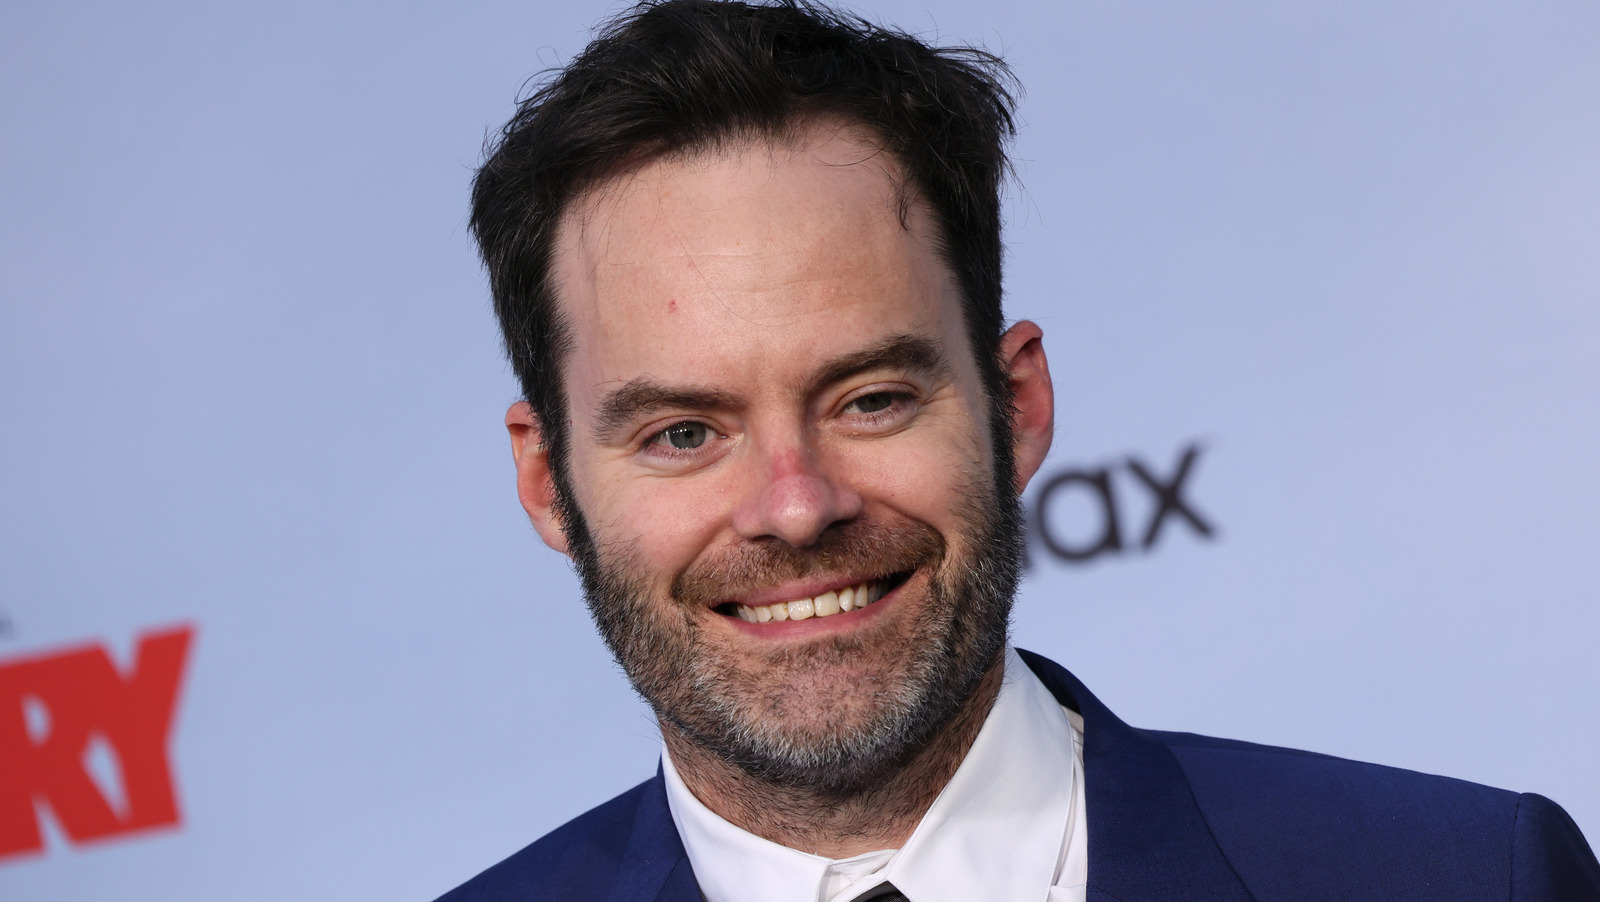 bill hader and ali wong reportedly had a secret but brief fling